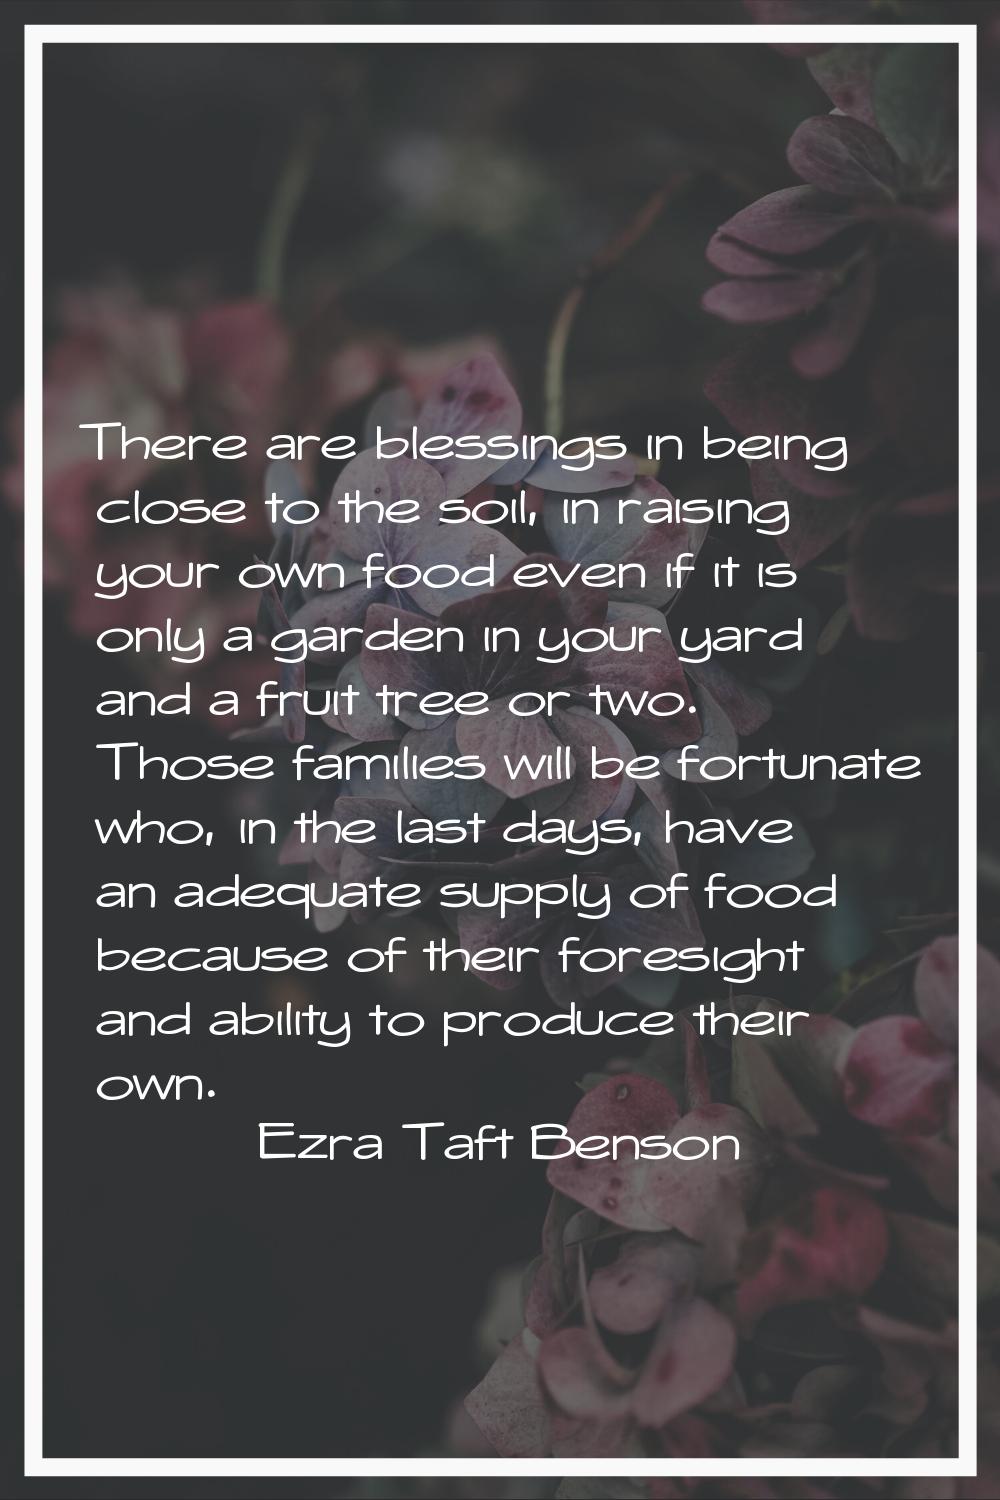 There are blessings in being close to the soil, in raising your own food even if it is only a garde